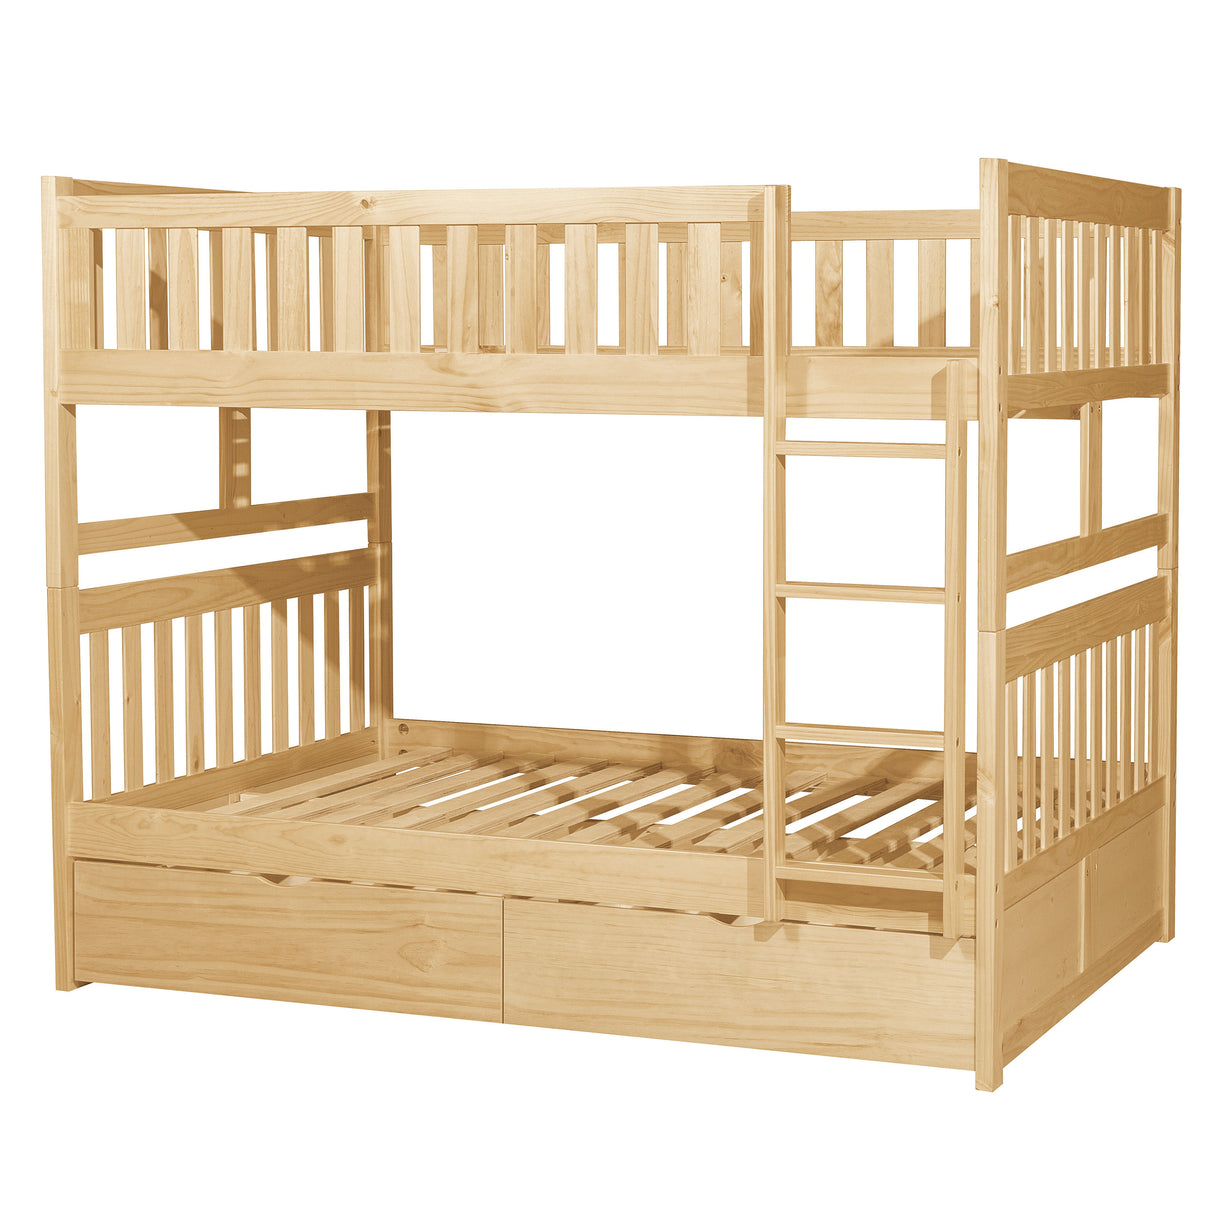 Bartly Pine Full/Full Bunk Bed with Storage Boxes